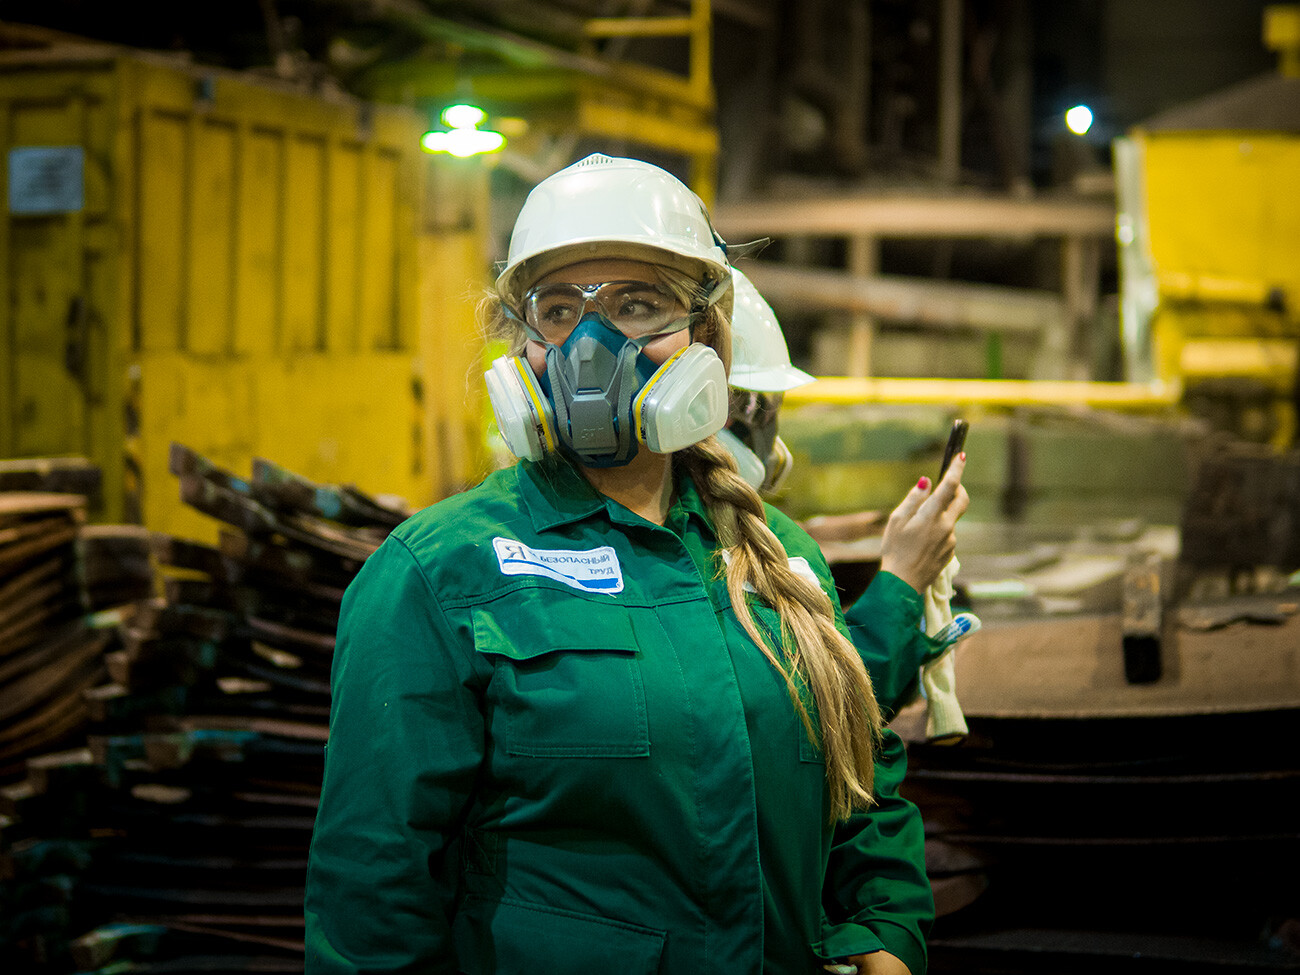 You cannot enter the workshop without a respirator, helmet and safety goggles. Every employee of the plant has special clothing.